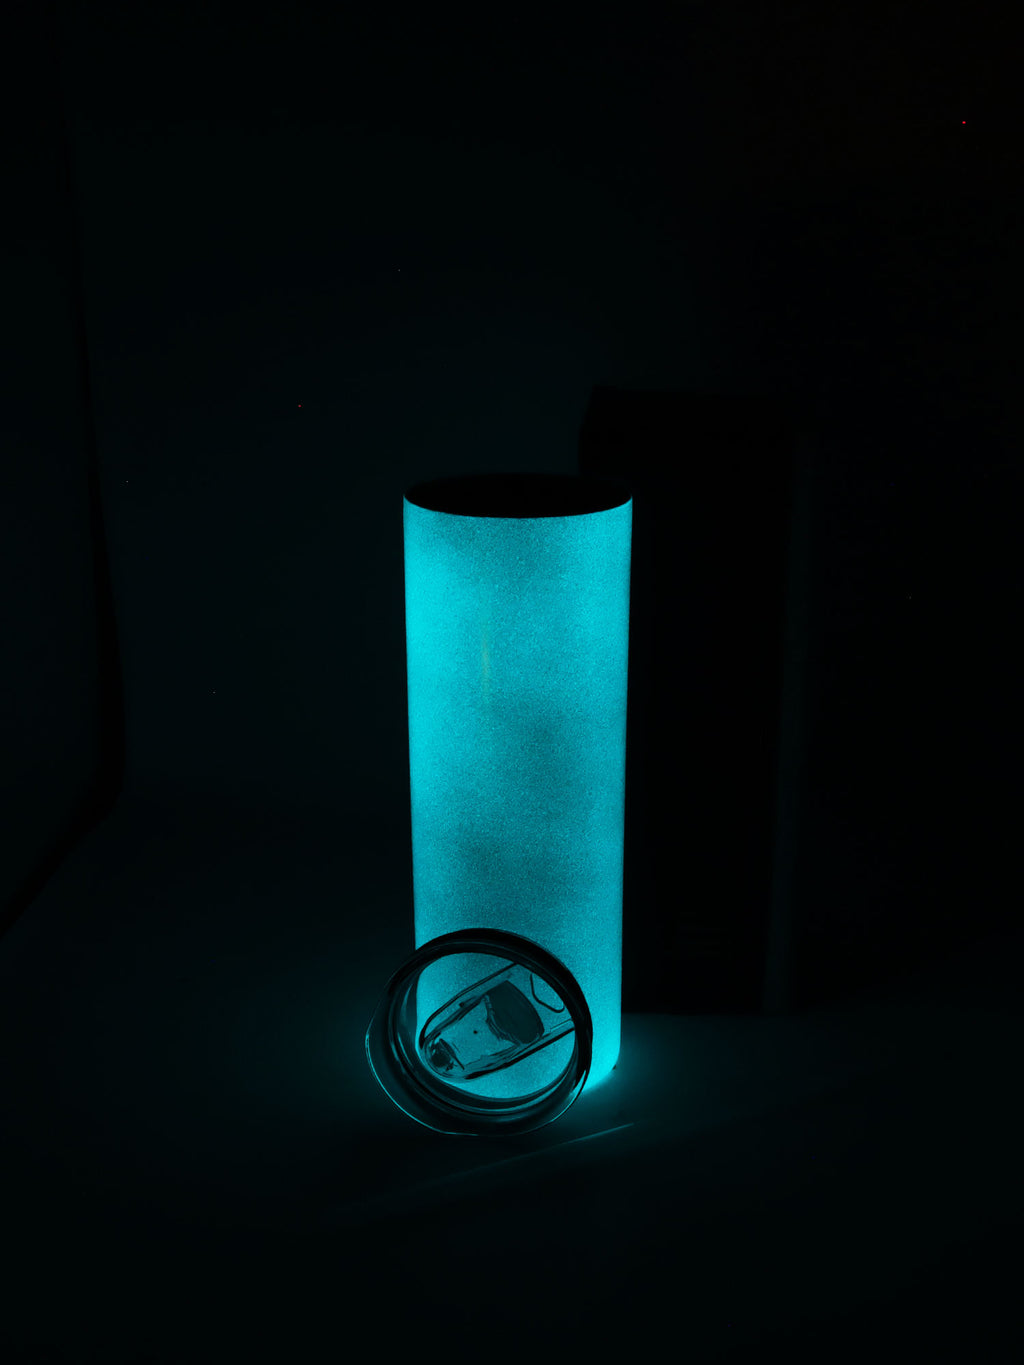 buy-sublimation-tumbler-glow-in-the-dark-the-tumbler-company